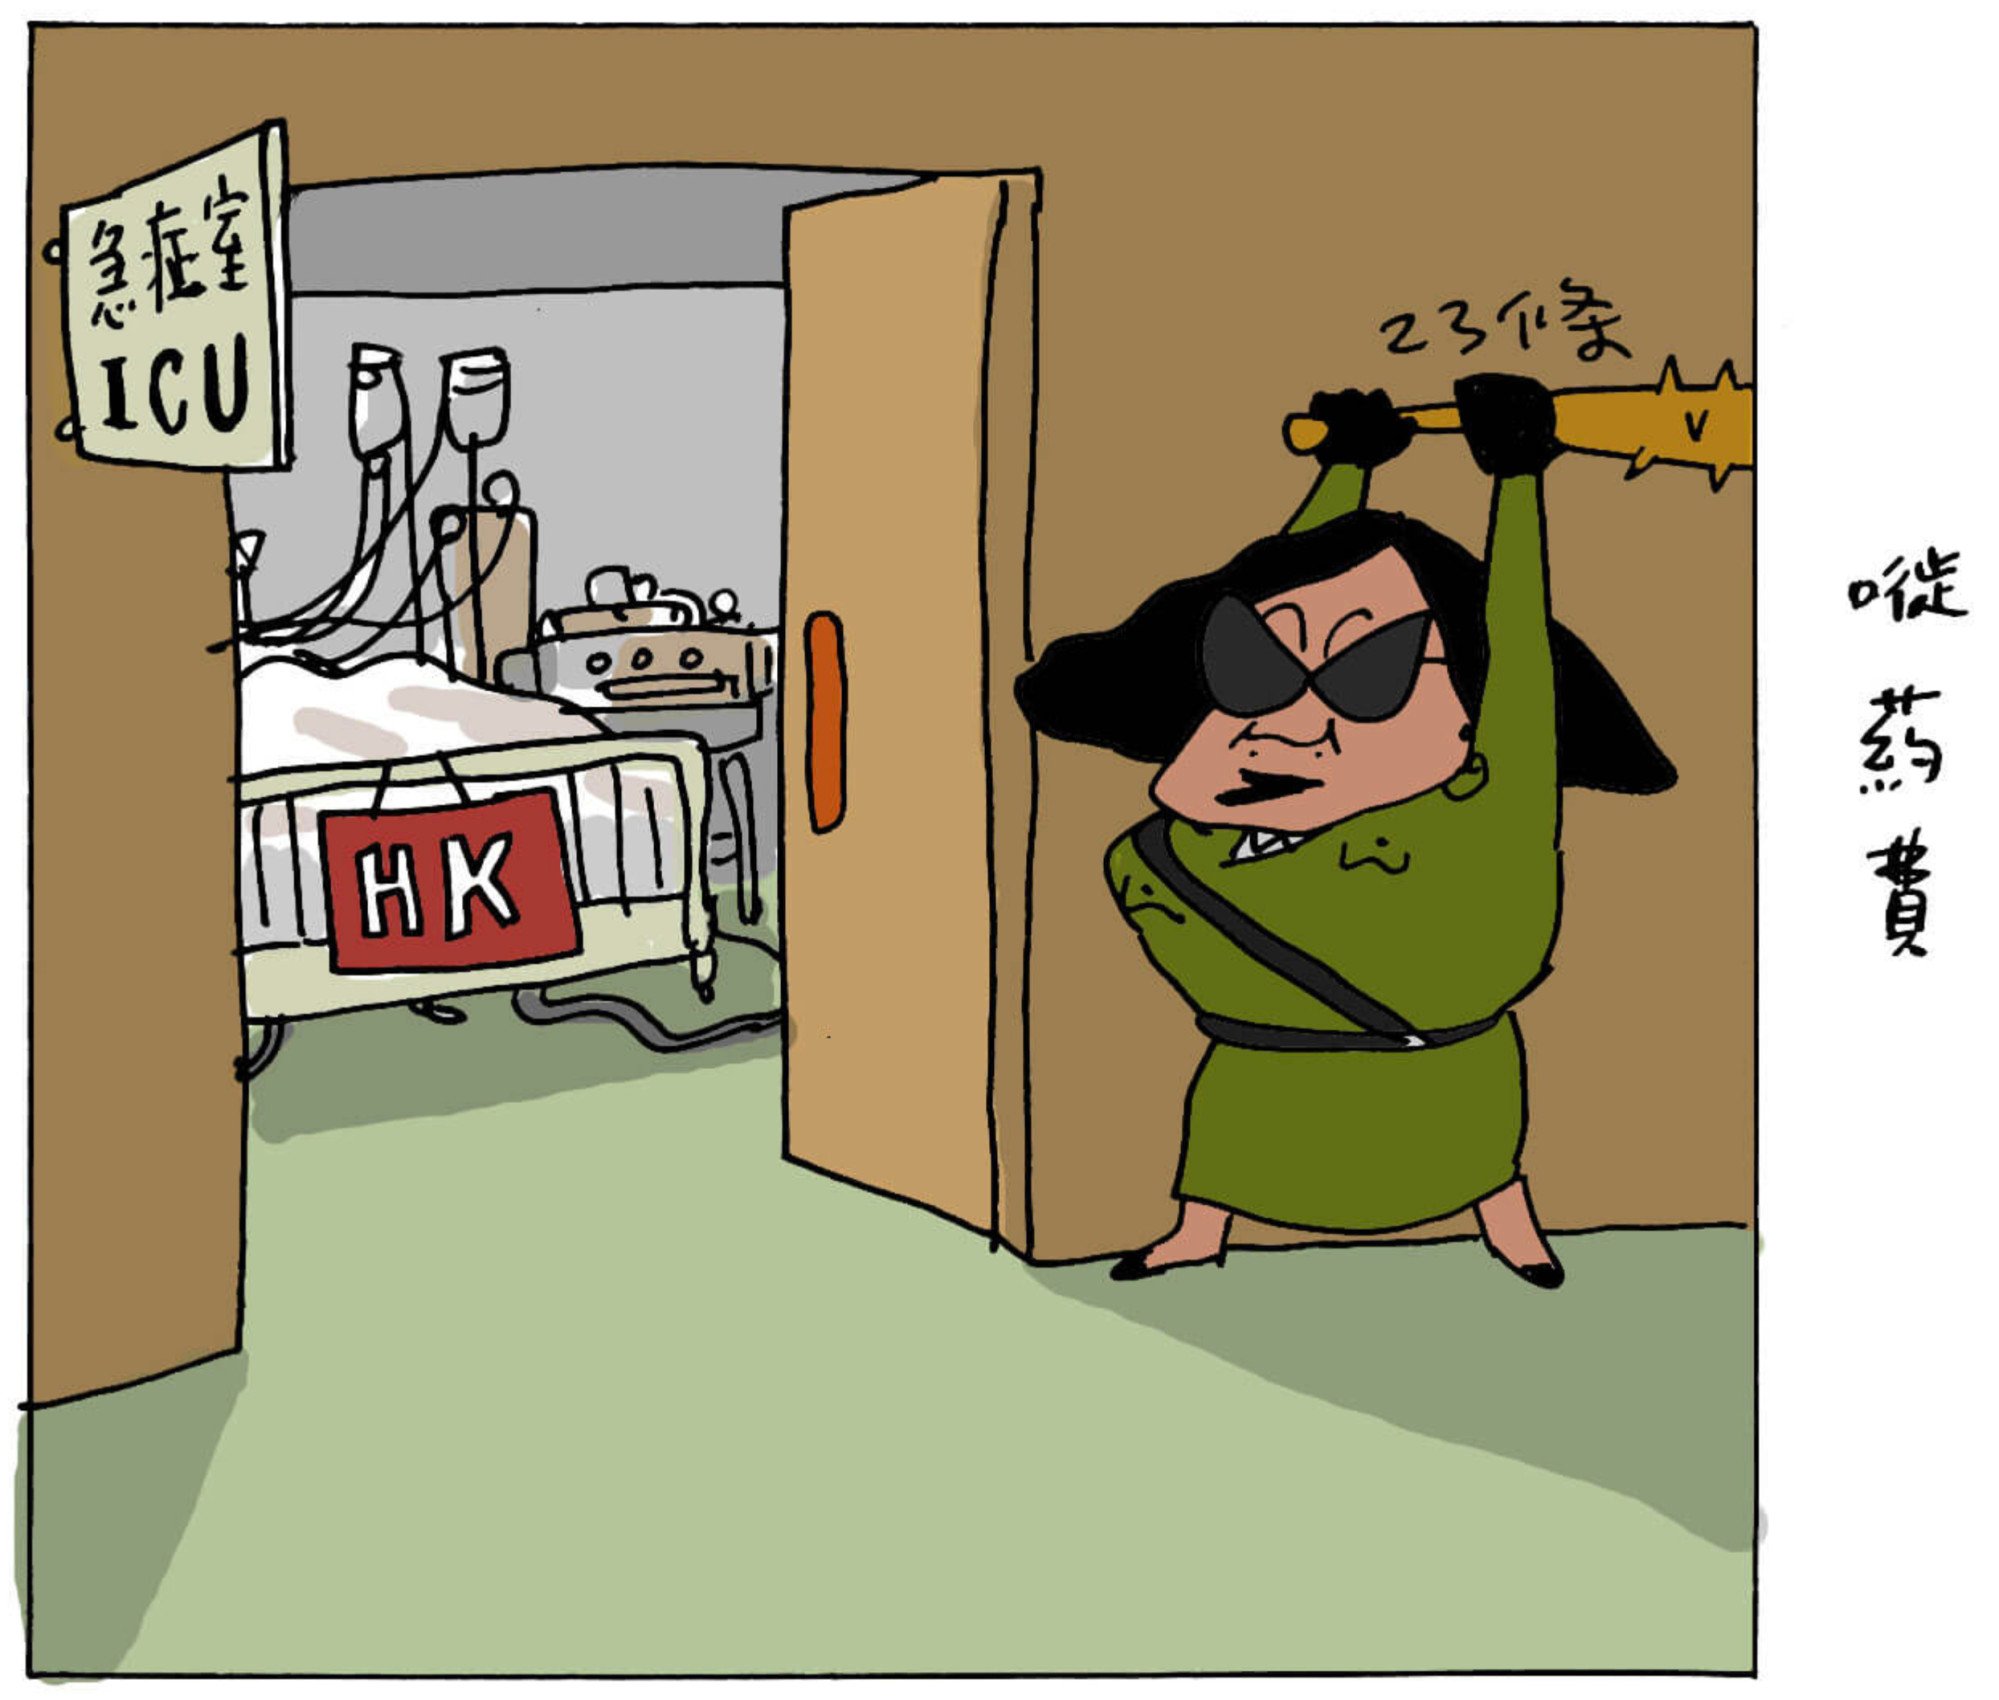 A cartoon by Zunzi in 2003 depicts ‘Broom Head’ Regina Ip making use of the proposed Article 23 law to bash an already ailing Hong Kong. Photo: Handout